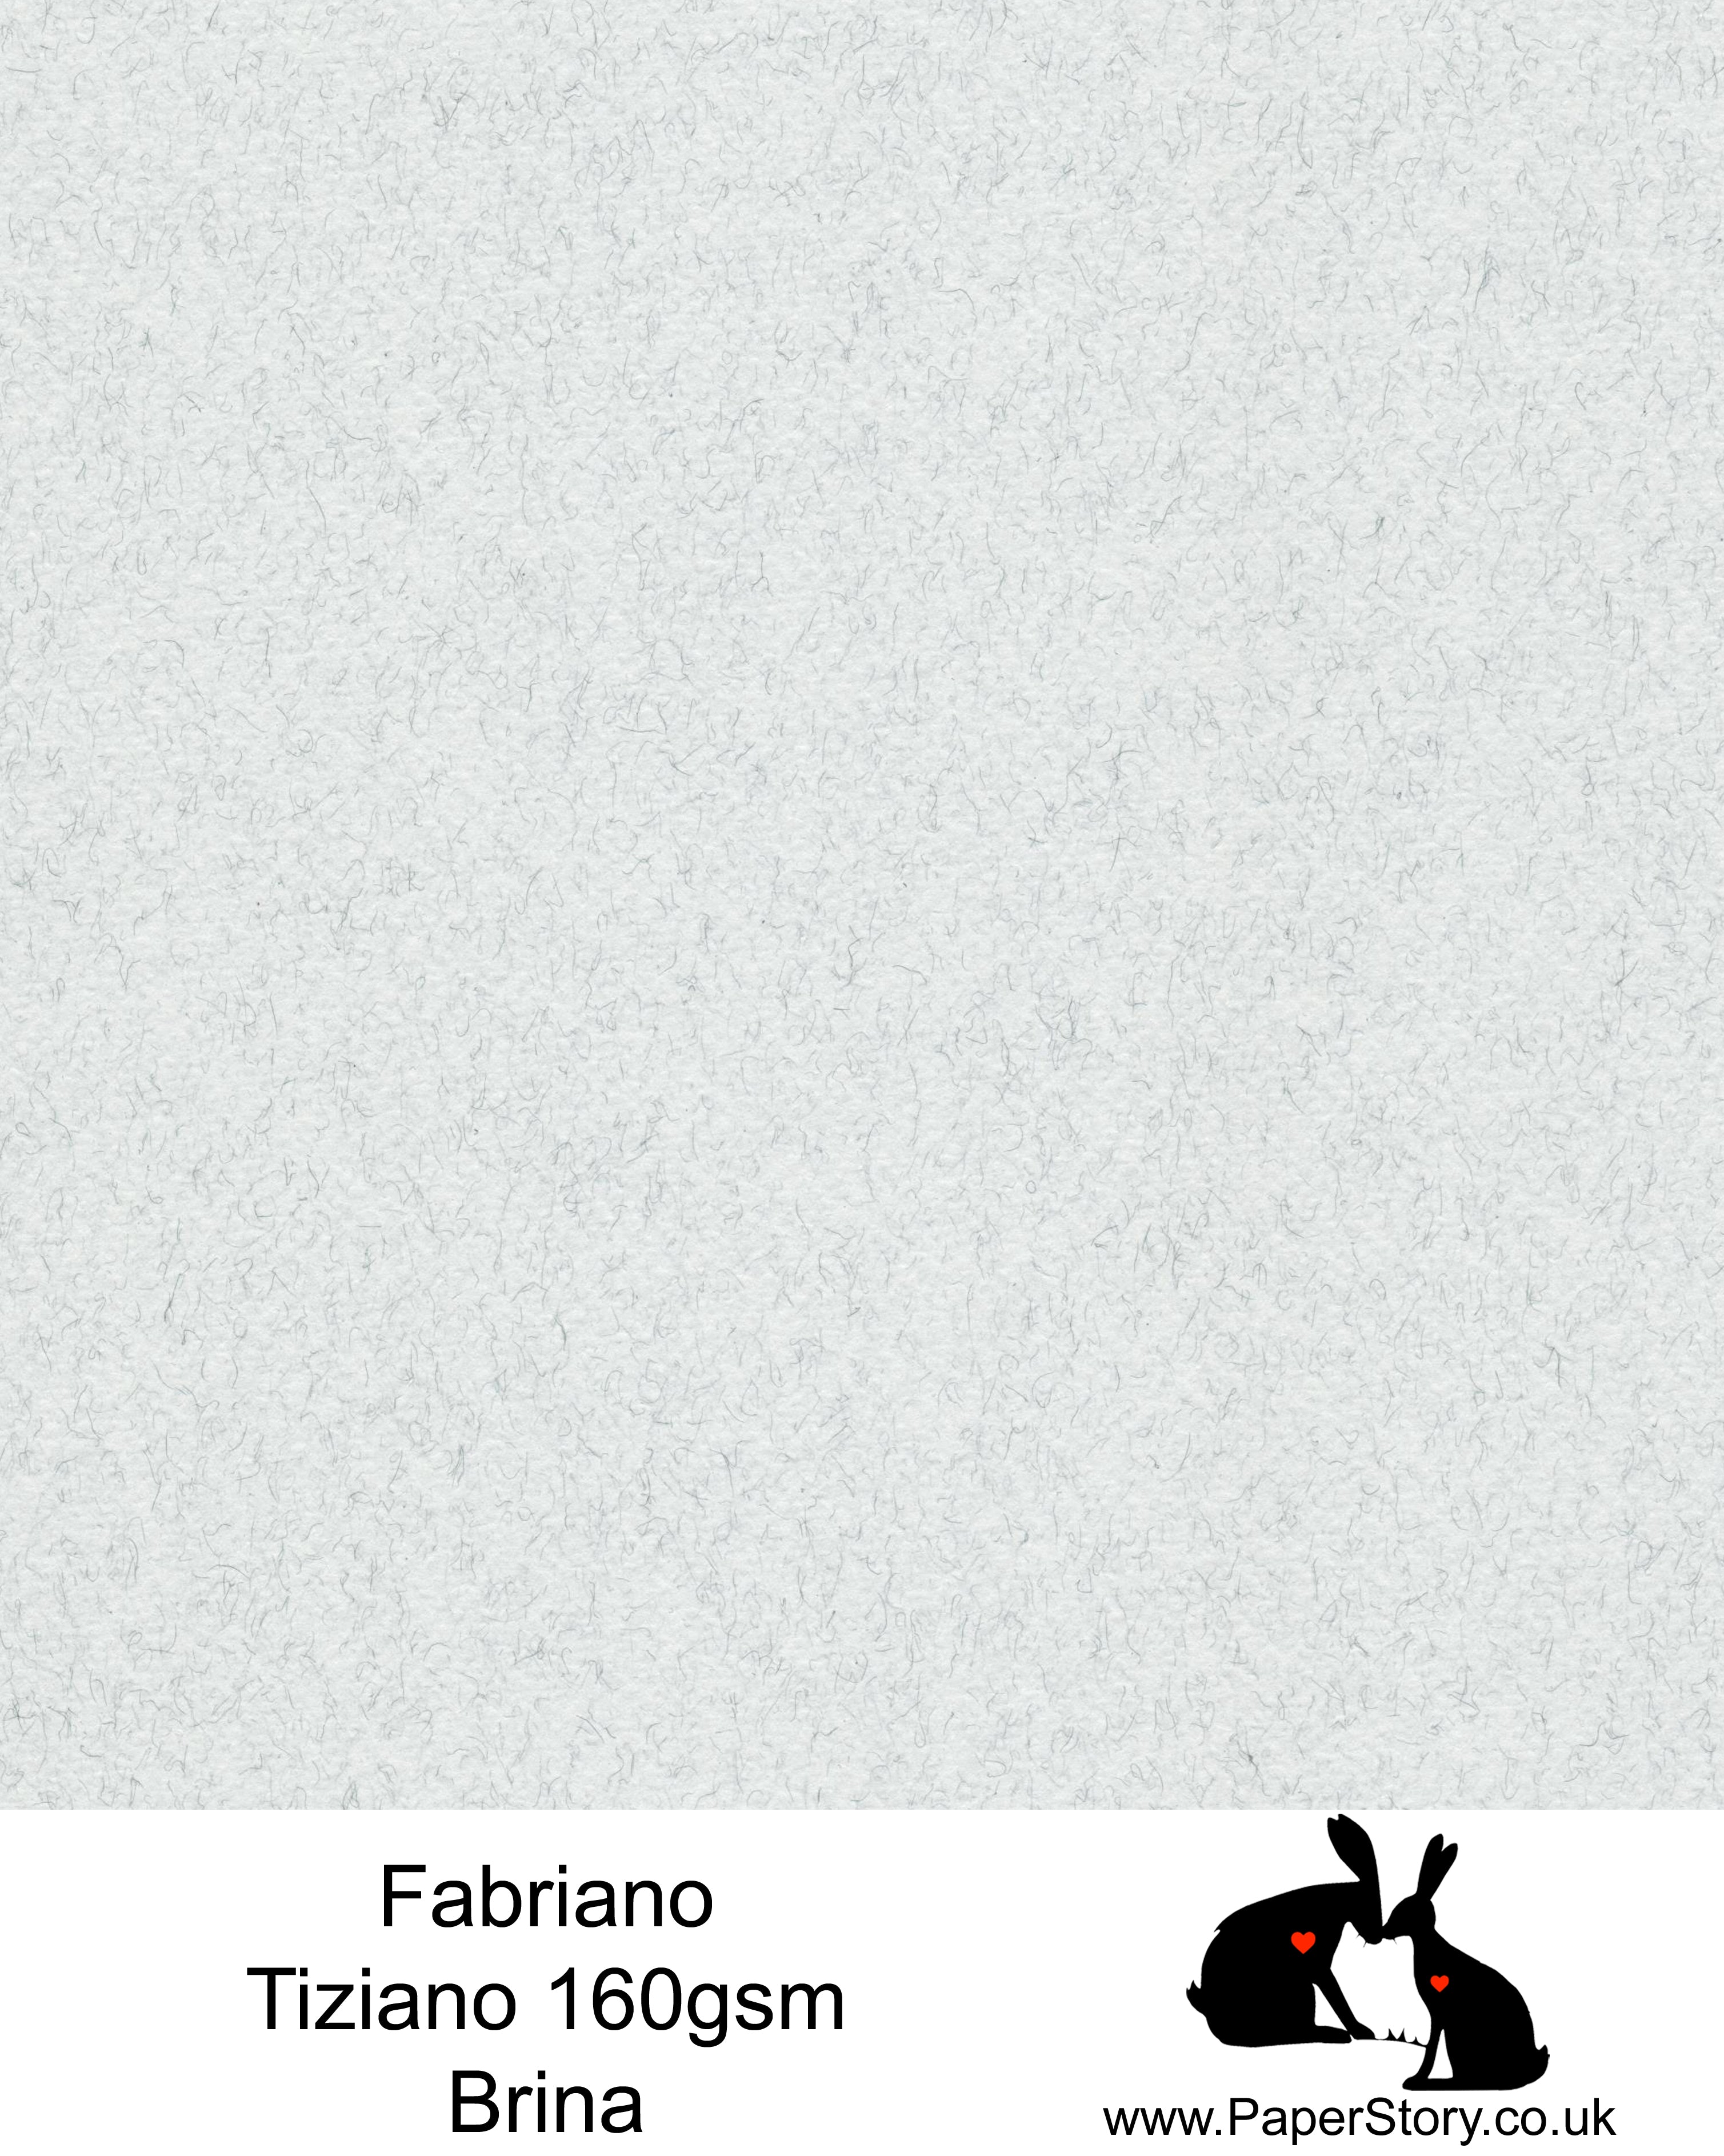 High quality paper from Italy, Brina, light soft felted grey  deep midnight navy blue Fabriano Tiziano is 160 gsm, Tiziano has a high cotton content, a textured naturally sized surface. This paper is acid free to guarantee long permanence in time, pH neutral. It has highly lightfast colours, an excellent surface making and sizing which make this paper particularly suitable for papercutting, pastels, pencil, graphite